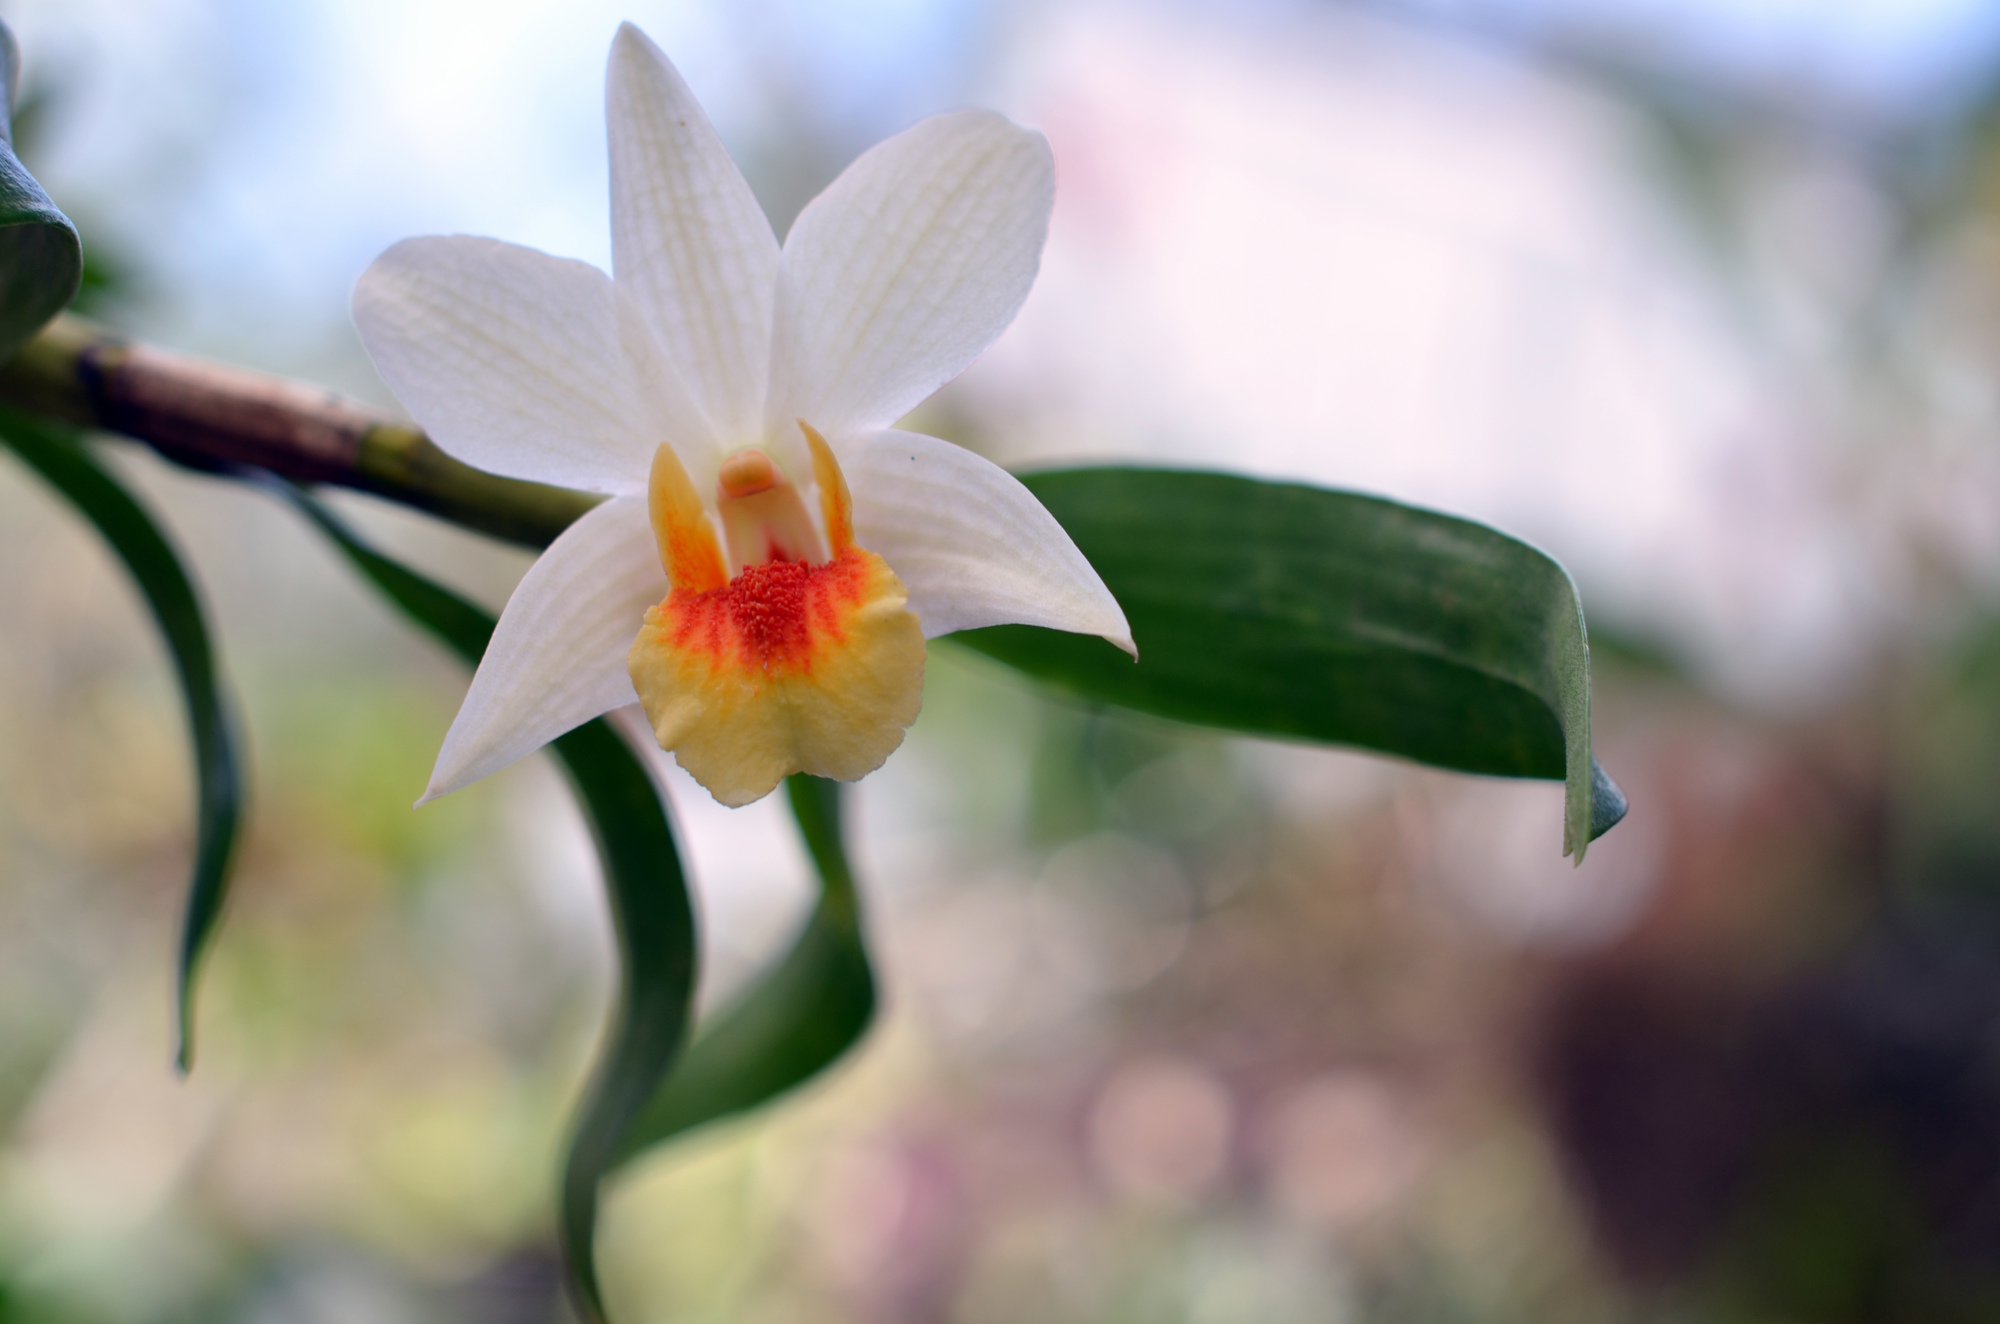 This dendrobium orchid has a much larger bloom than most.